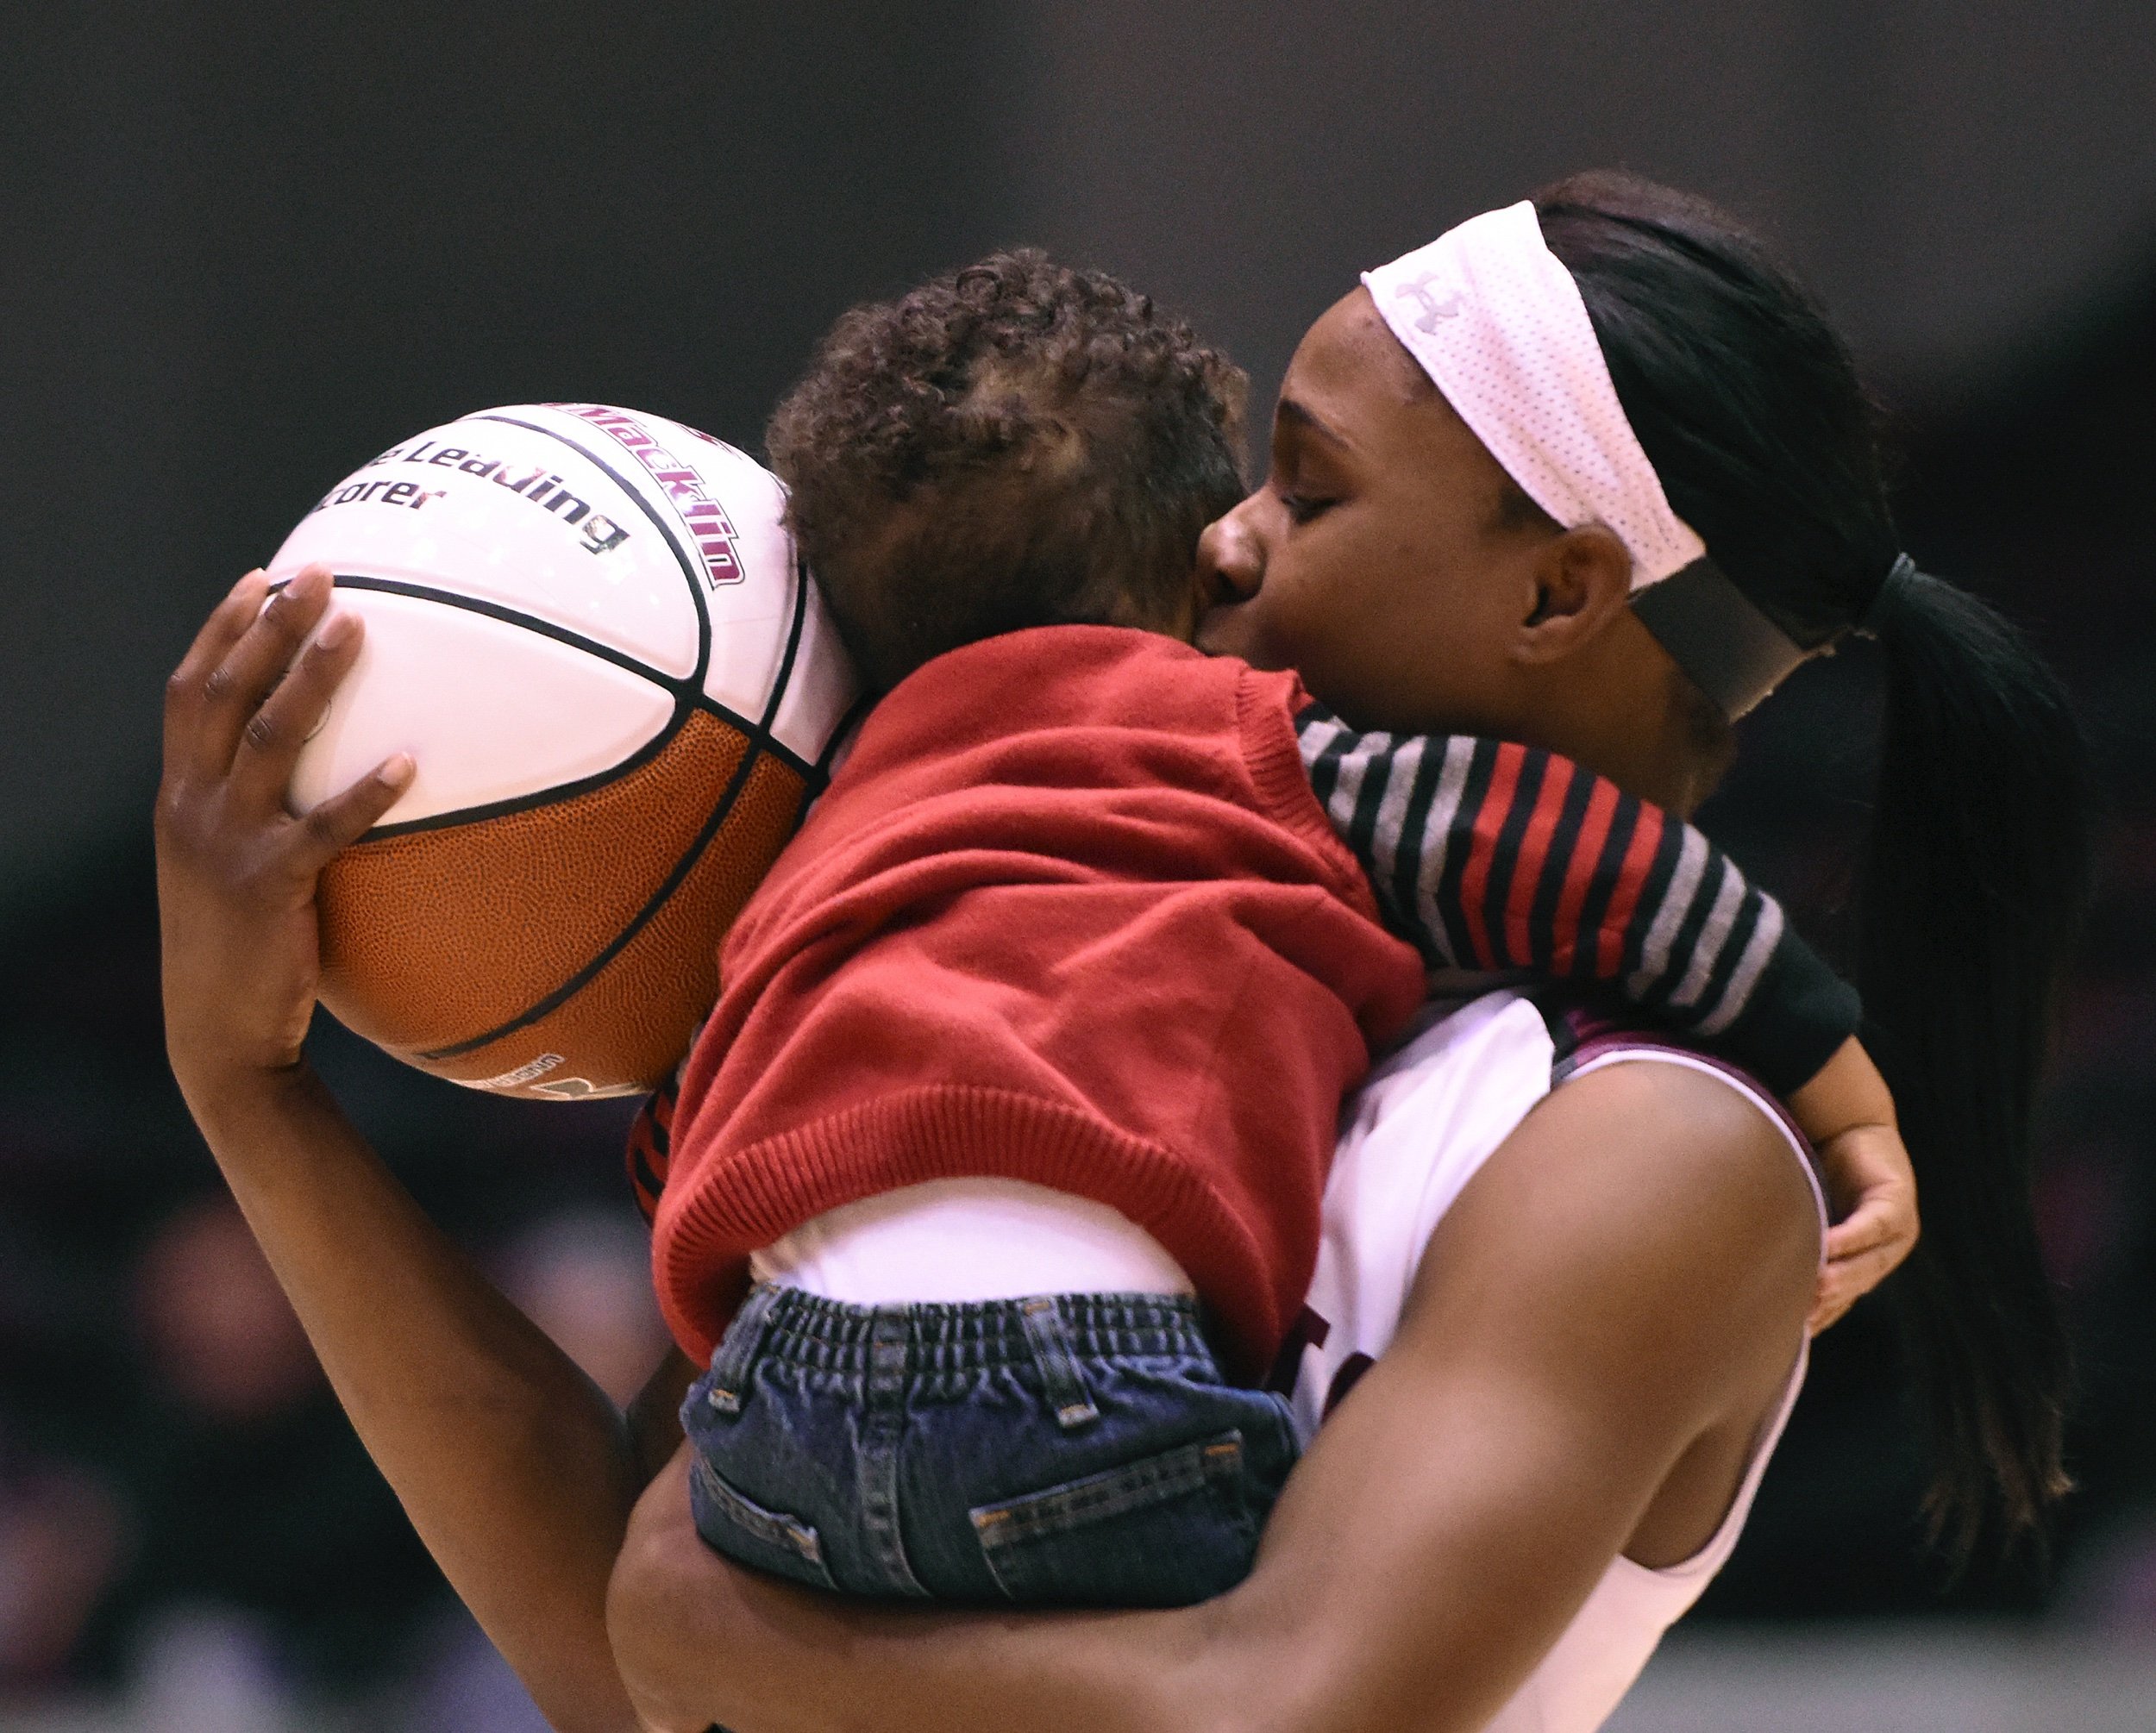  Southern Illinois University senior guard Cartaesha Macklin kisses her 1-year-old son, Carson Verhines after SIU’s 74-56 win against Evansville on Jan. 16 at SIU Arena in Carbondale, Illinois. During the game, Macklin became the top scorer in Saluki